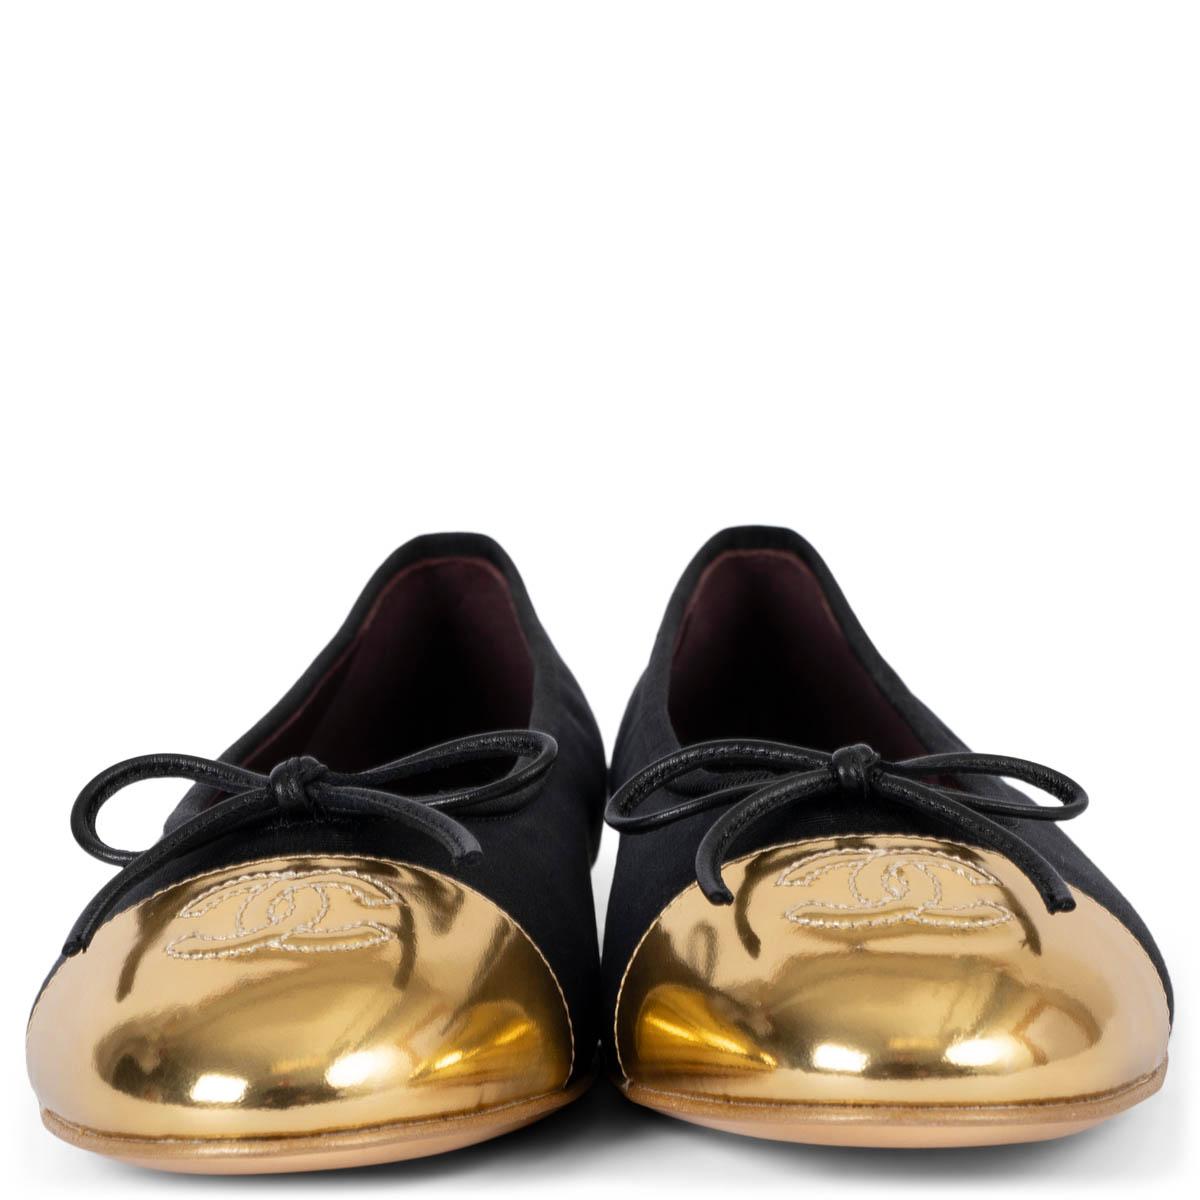 100% authentic Chanel classic ballet flats in black grosgrain fabric with gold-tone laminated calfskin cap toe. Brand new. Comes with dust bag and box. 

2022 Paris-Dubai Resort

Measurements
Model	22C G38678 Y55700 K3597
Imprinted Size	37
Shoe